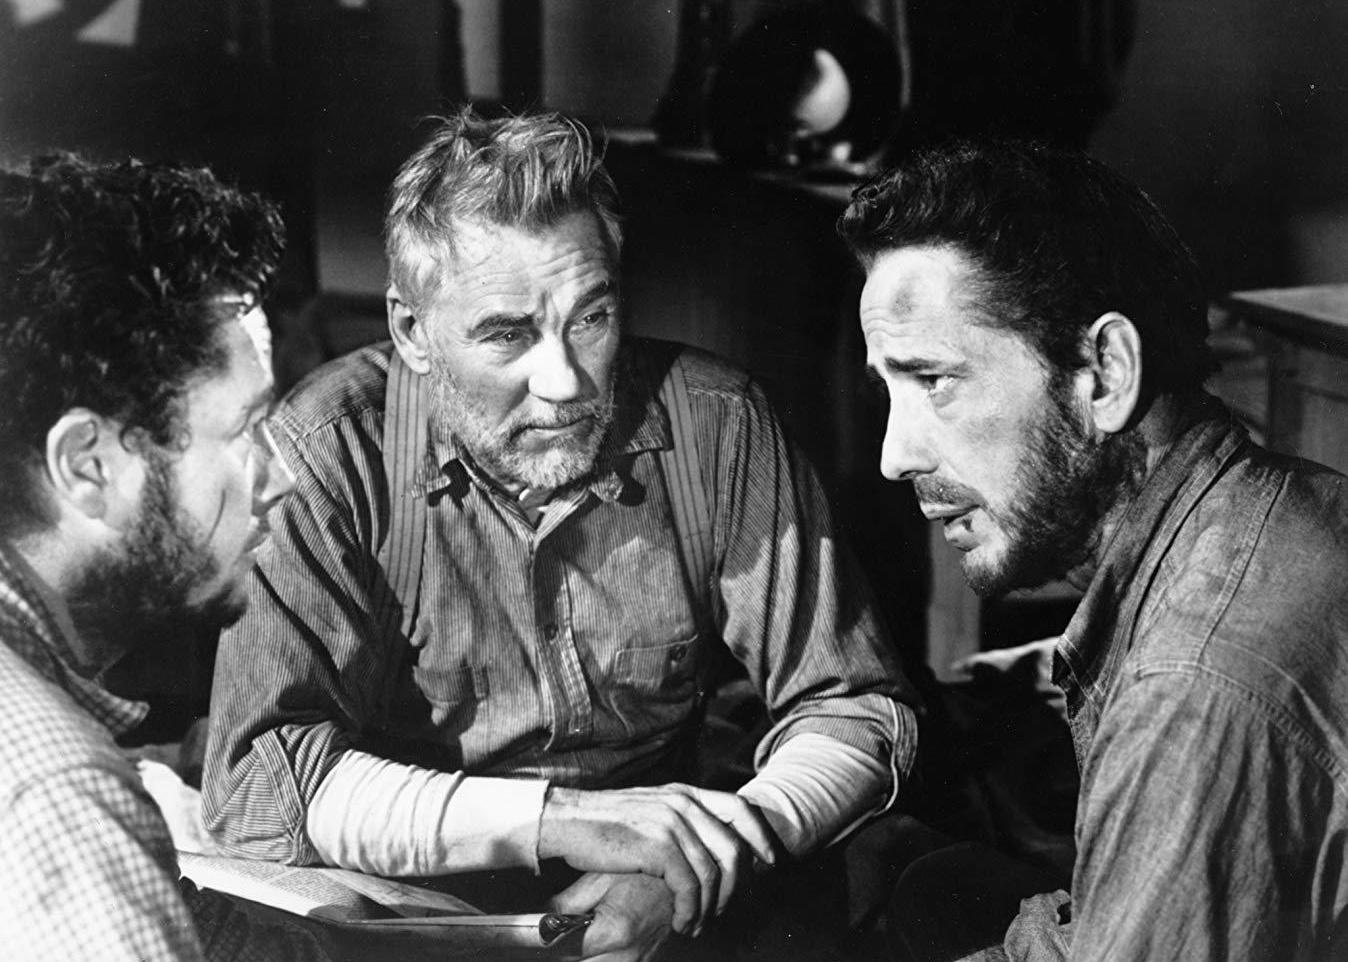 Humphrey Bogart, Tim Holt, and Walter Huston in a scene from The Treasure of the Sierra Madre.